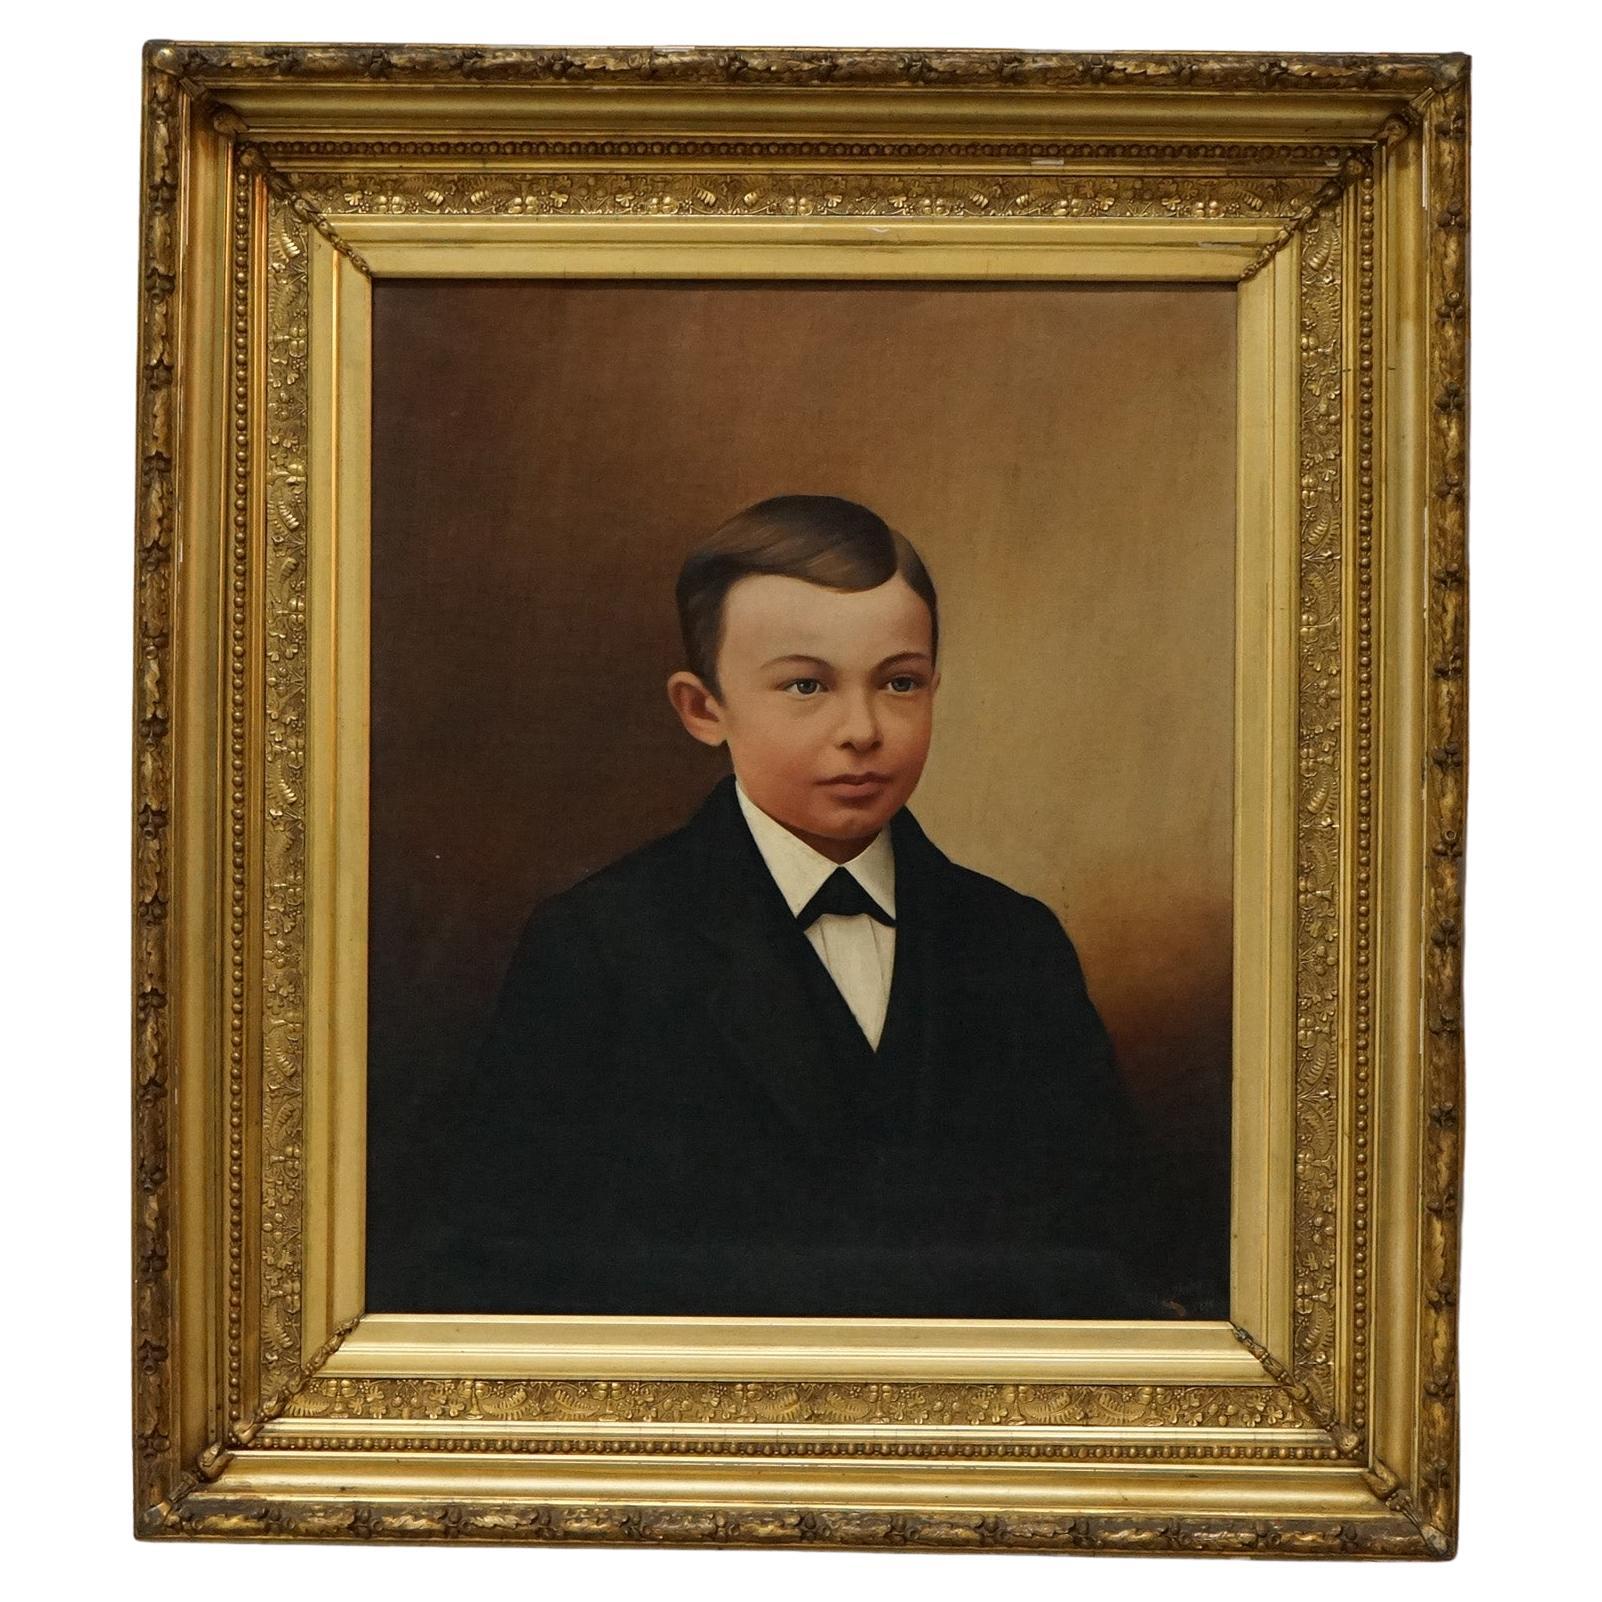 Antique Oil Painting, Portrait of a Young Boy by S.B. Shiley, c1880